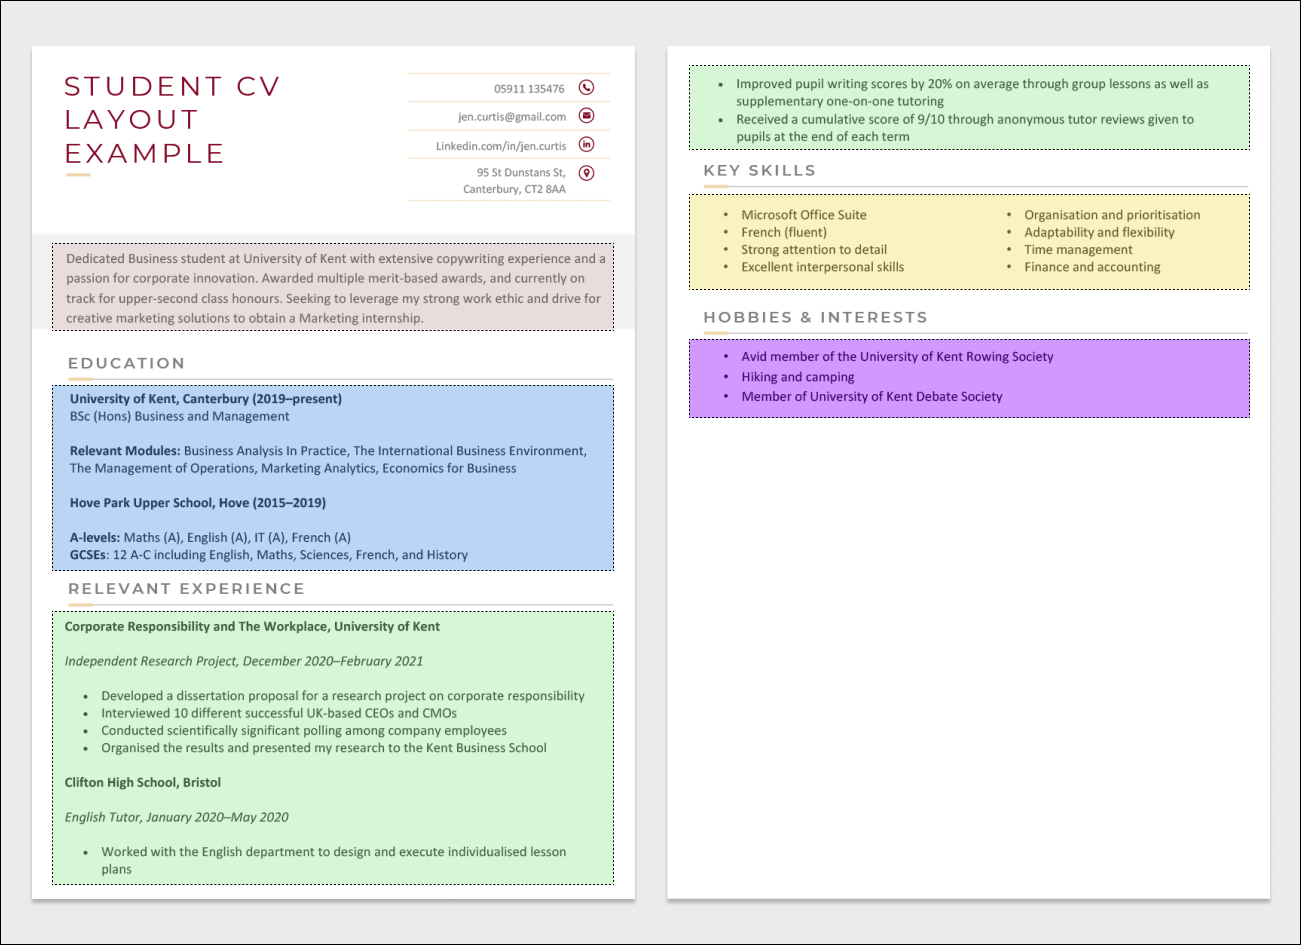 Example of a two-page student CV displayed side-by-side on a light grey background and coloured CV sections to illustrate how a student CV layout should look like